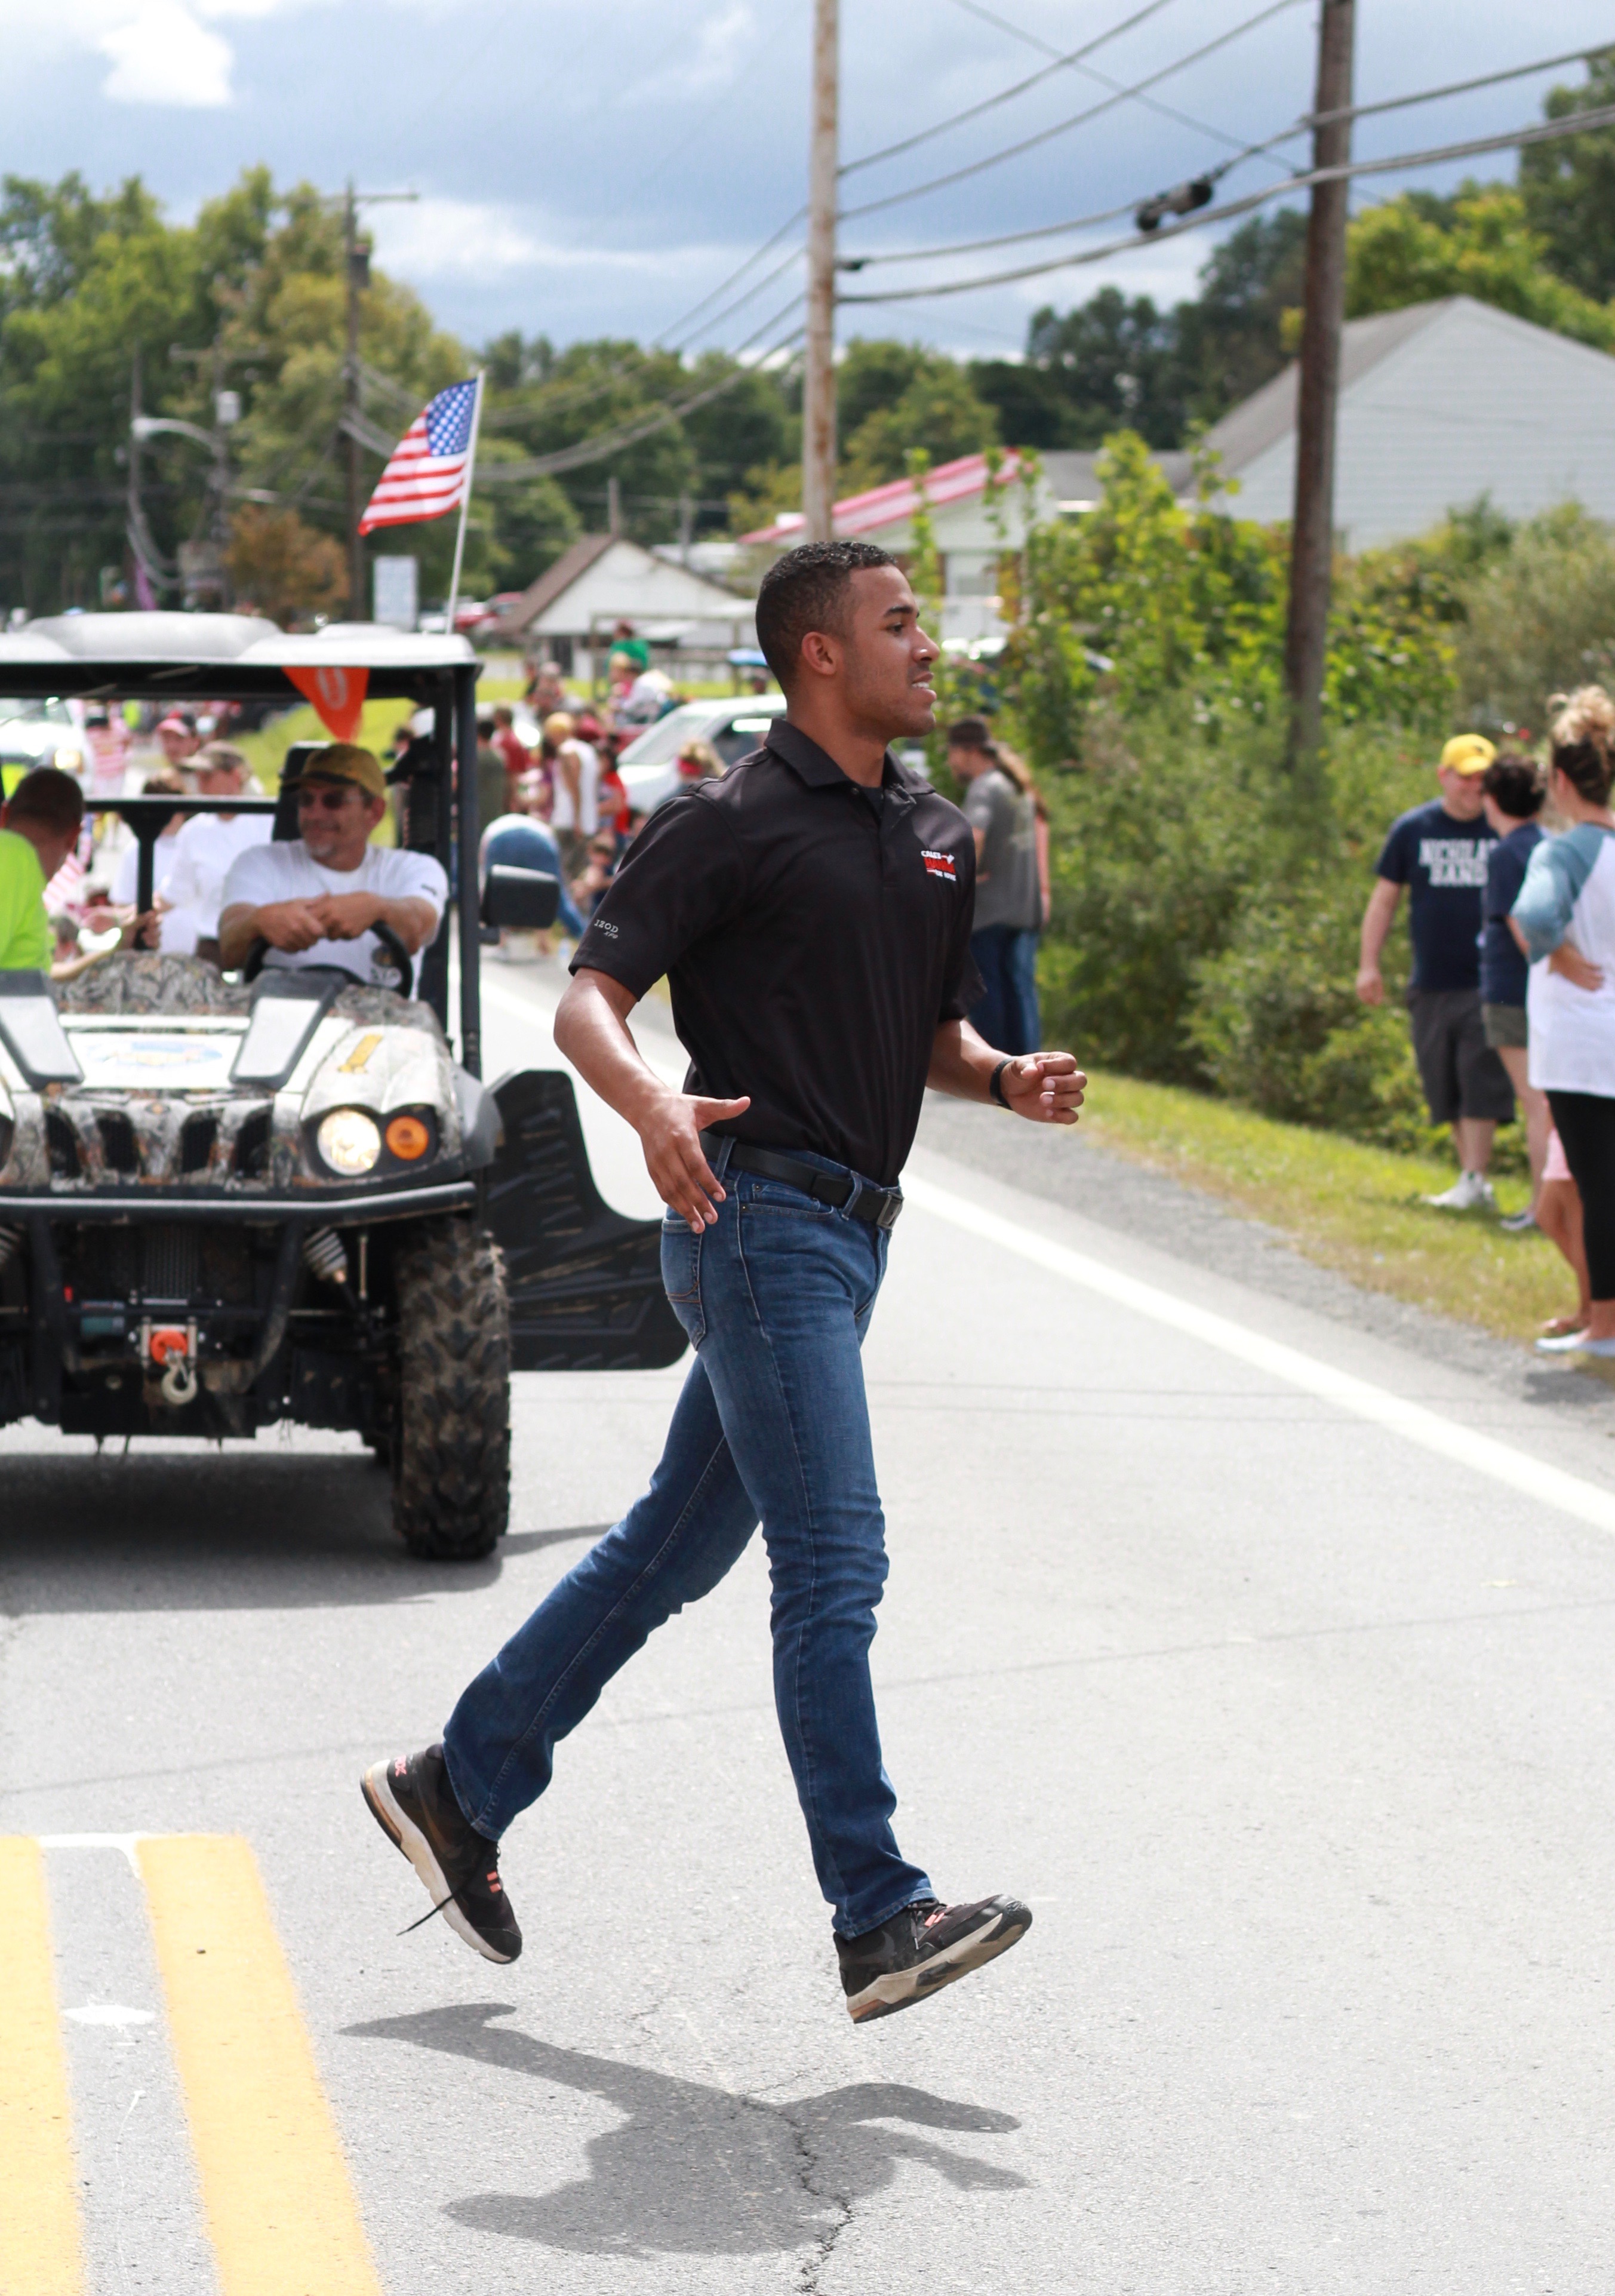 West Virginia Delegate Caleb L. Hanna campaigns in Craigsville, West Virginia, in August 2018. Photo by Macie Tenney